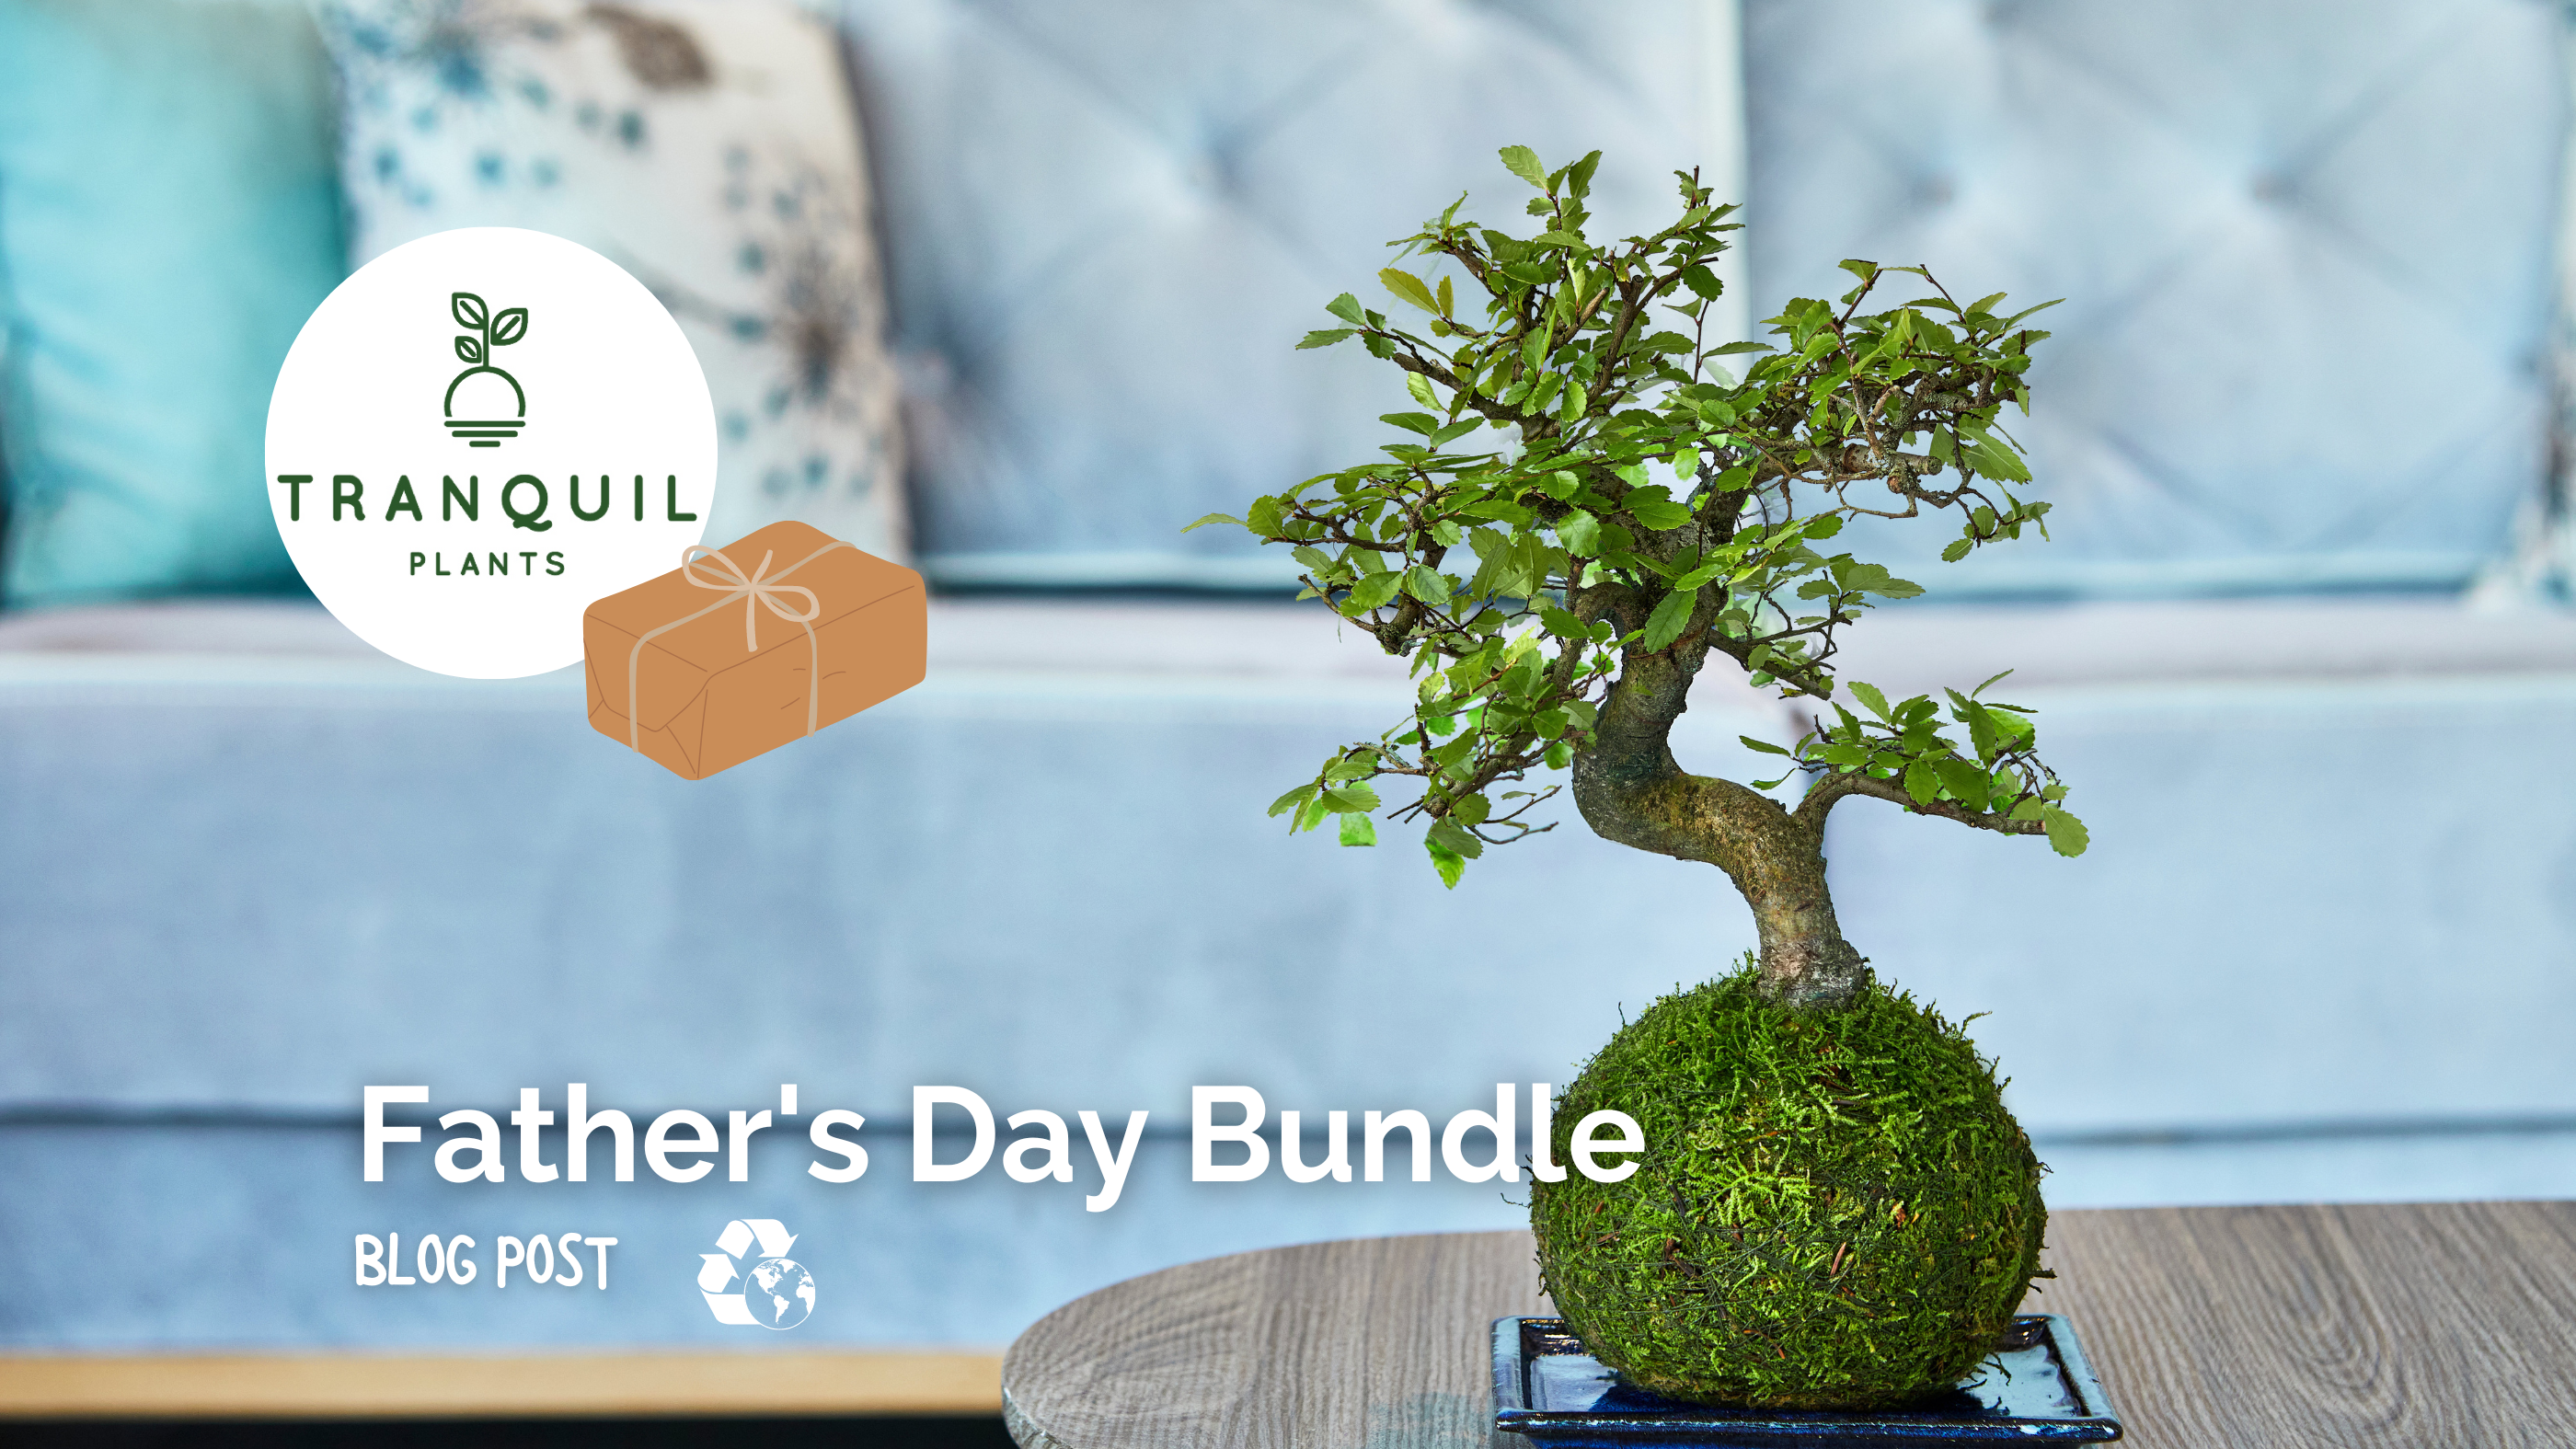 Father’s Day: A Sustainable, Easy-care Gift